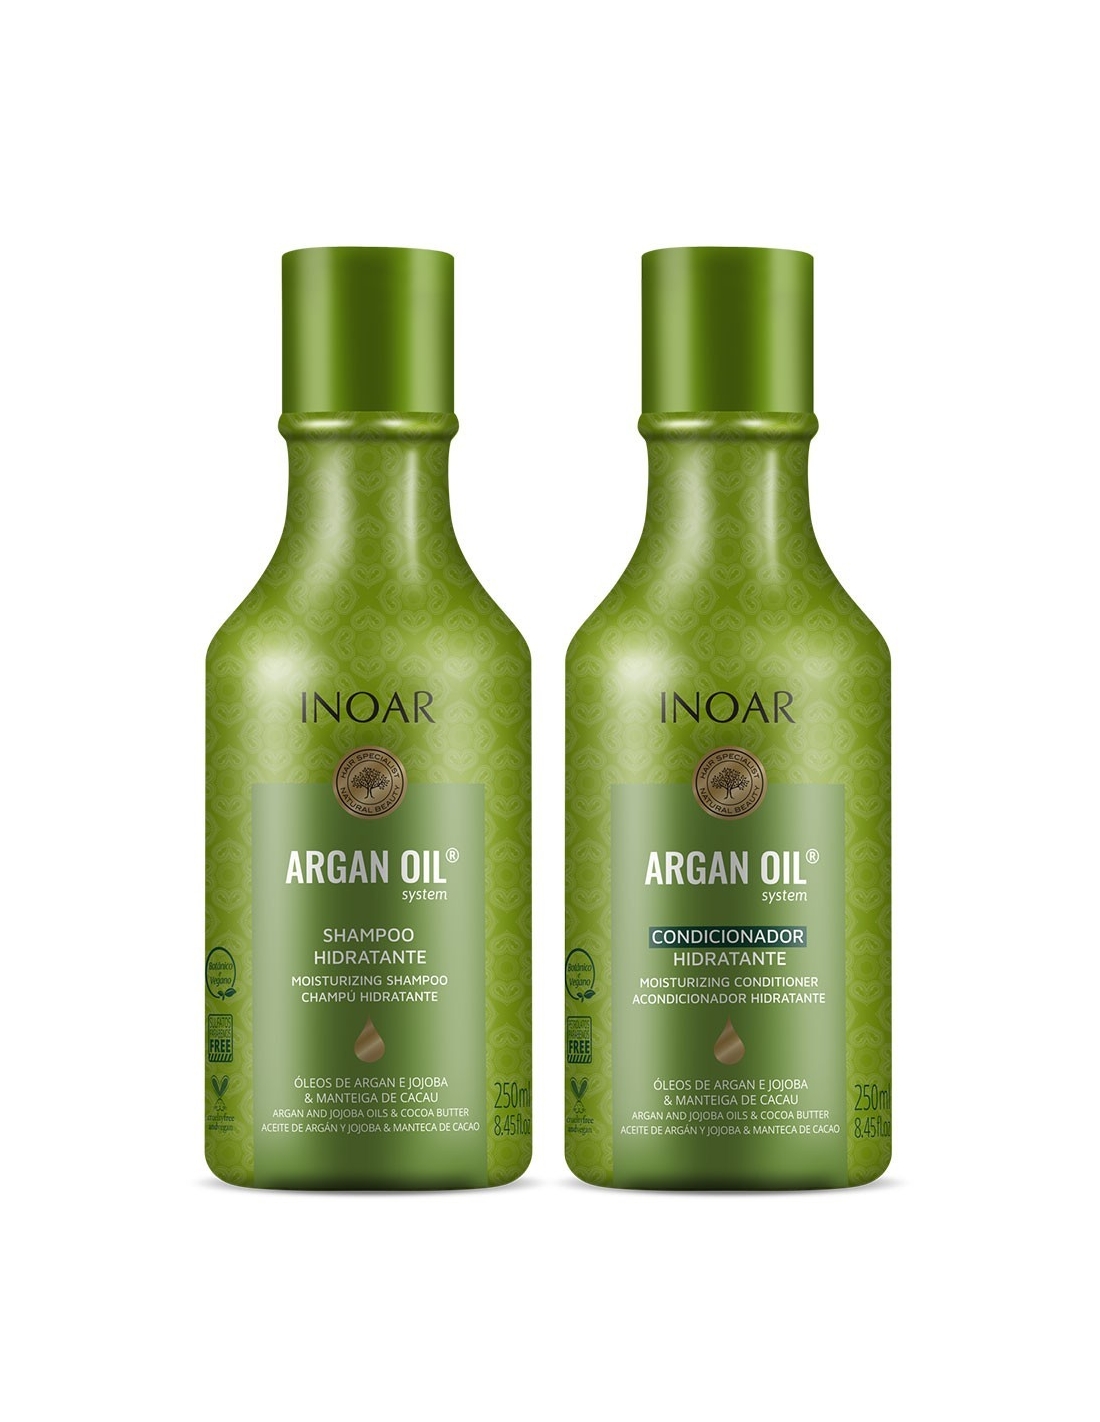 Argan Oil Shampoo and Conditioner Set - Sulfate-Free Formula with  Nourishing Moroccan Oil and Keratin -for All Hair, Curly or Straight -  Hydrate